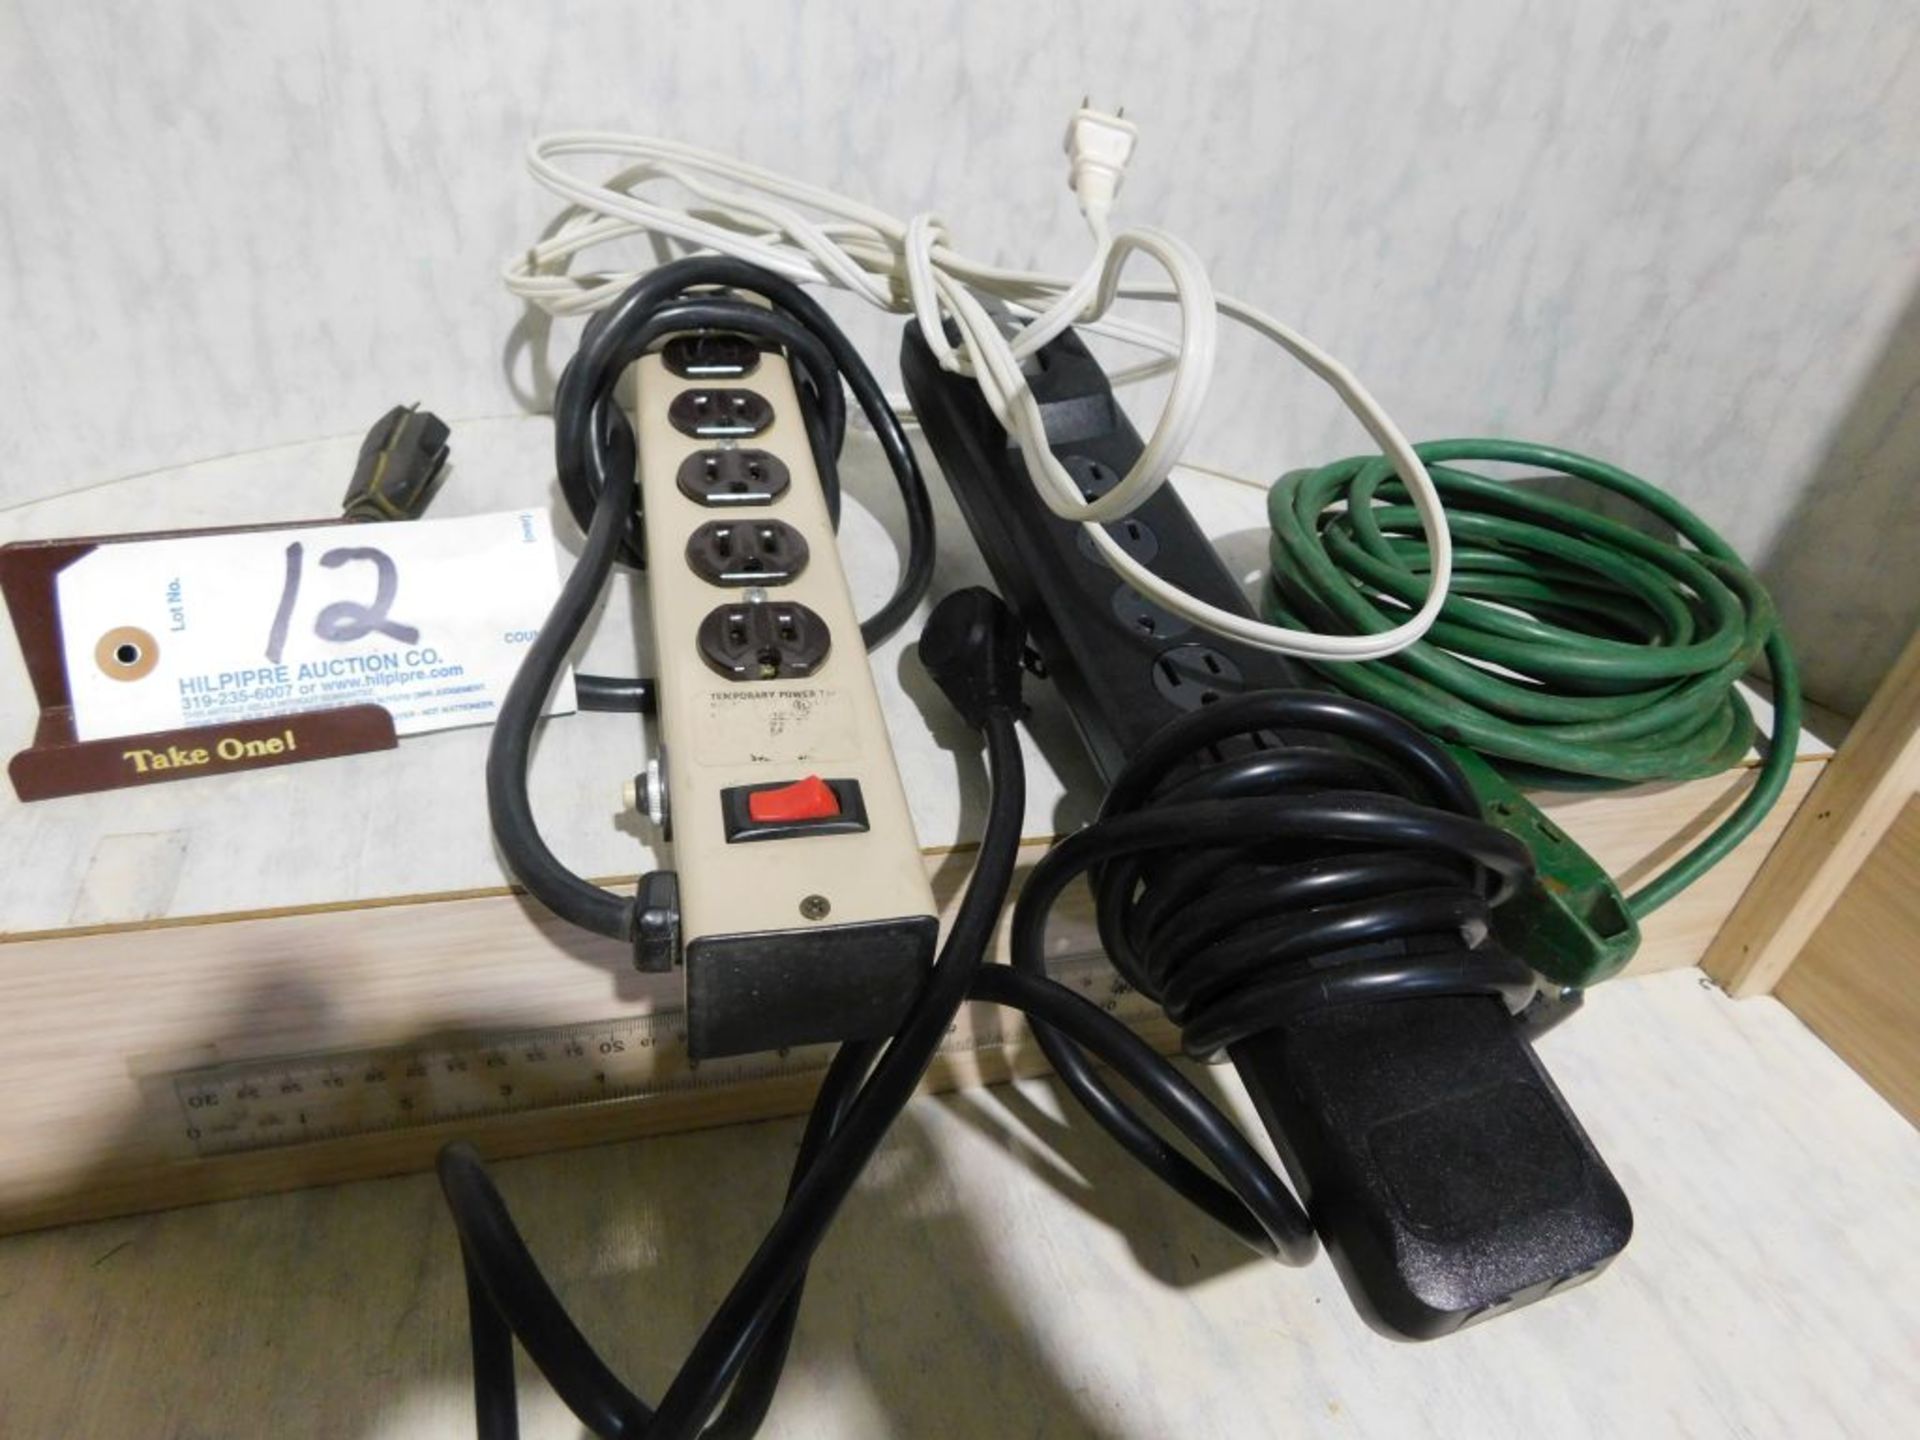 Power surge strips, multi plugs. (Located at and to be picked up at: 2862 Wagner Rd., Waterloo, IA)